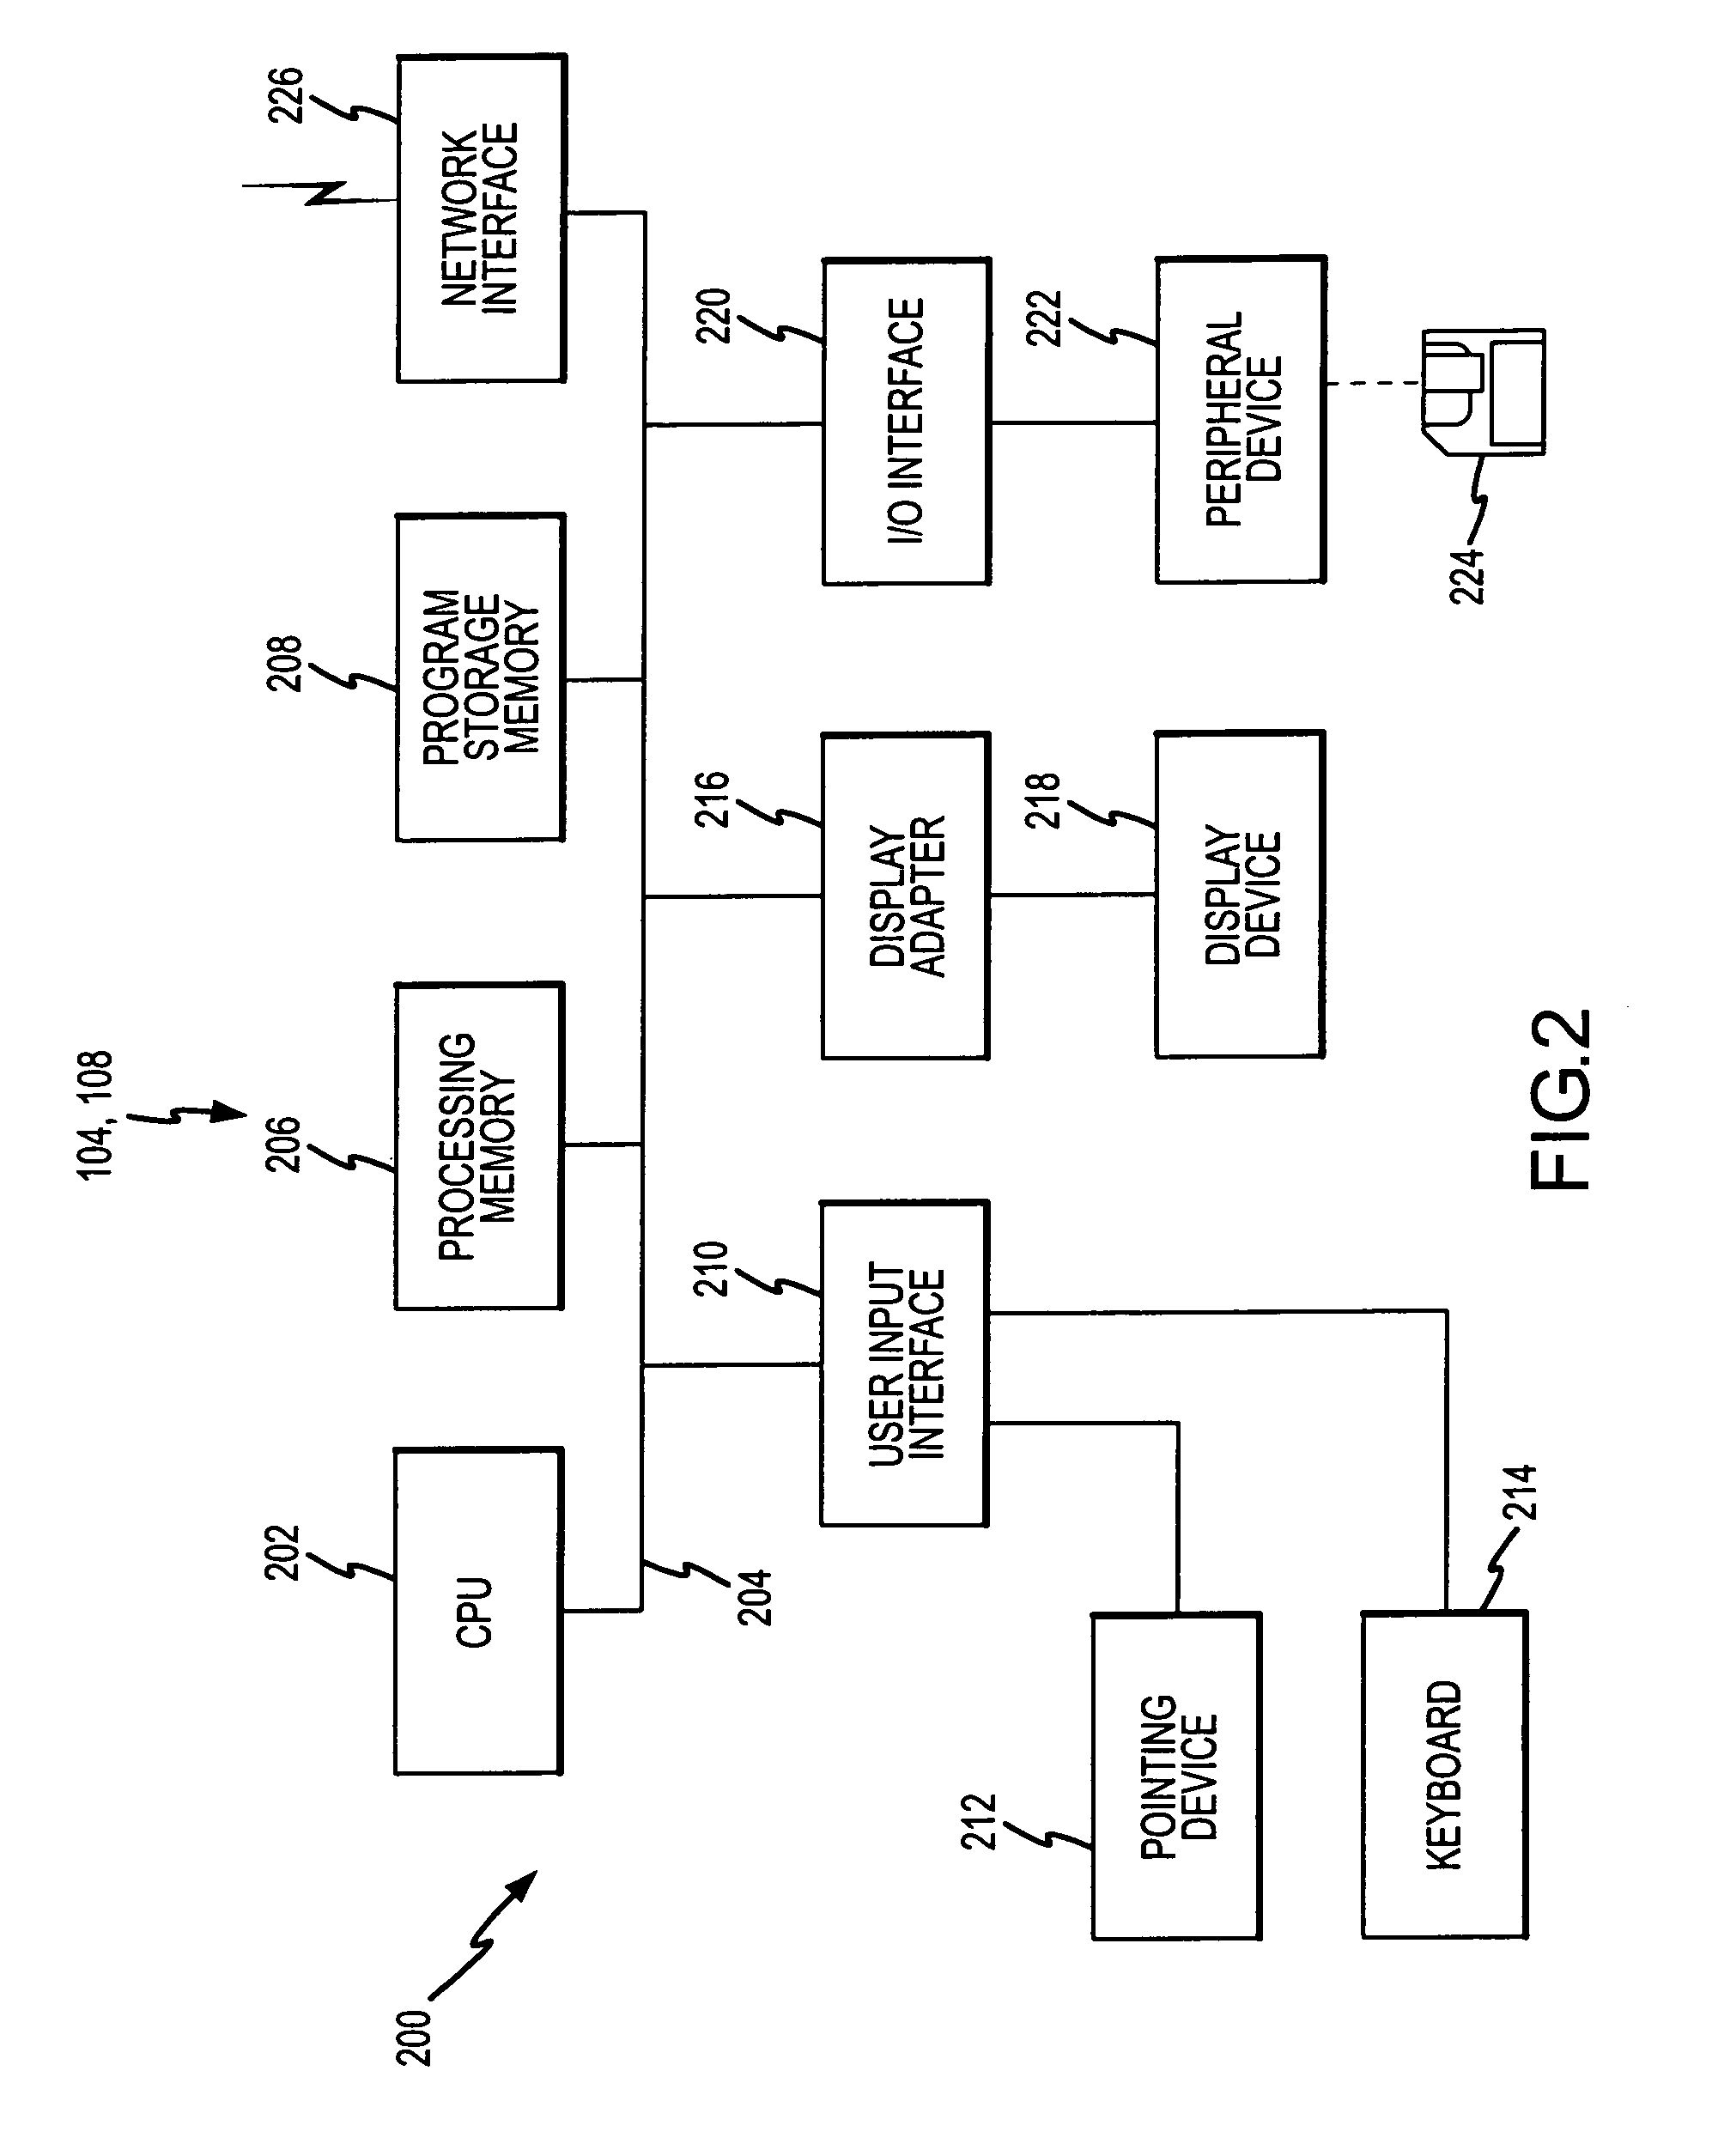 Method and apparatus for translating computer programs